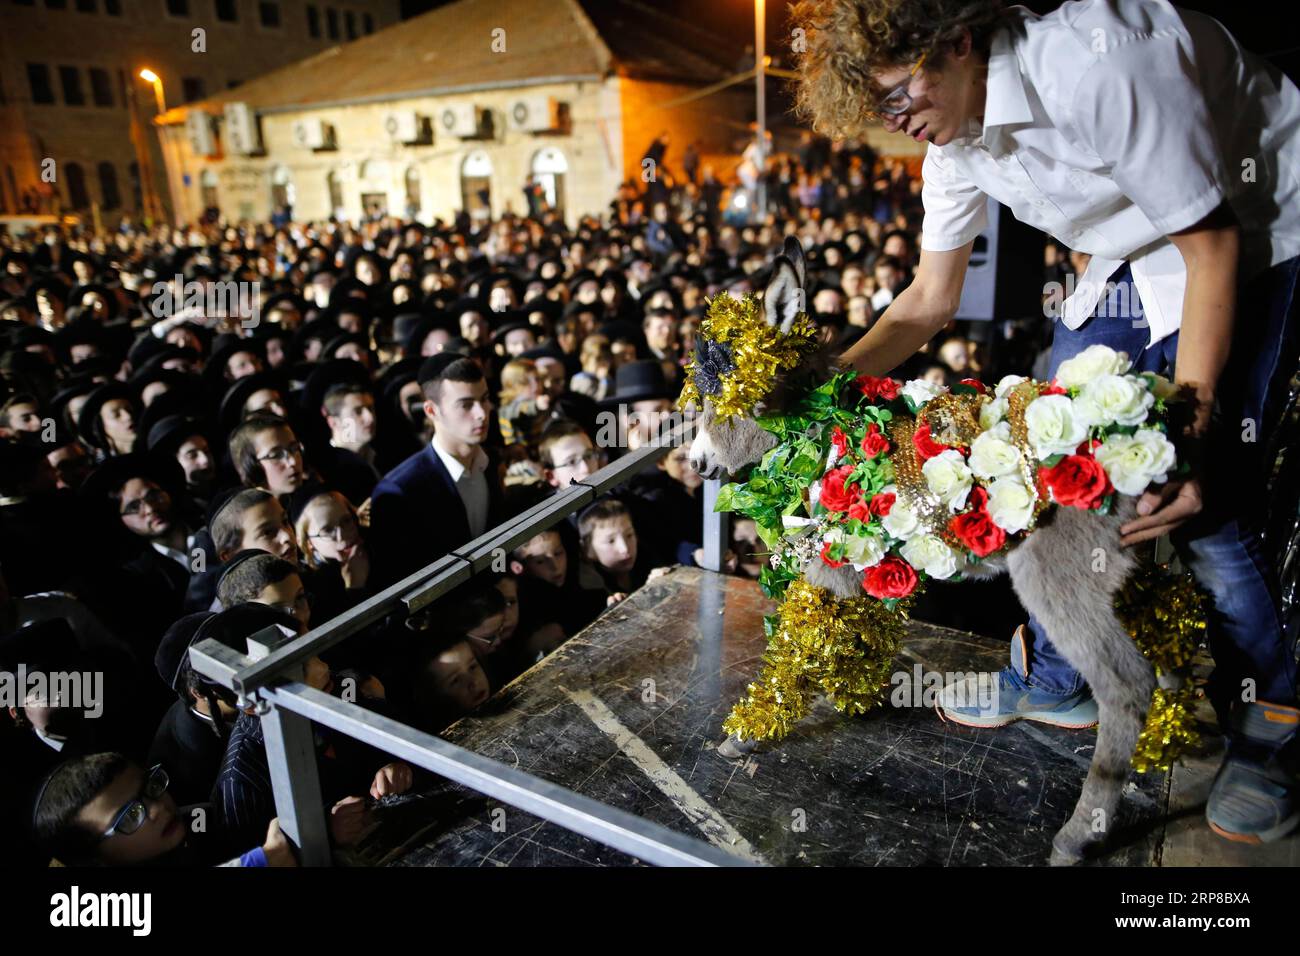 (190226) -- JERUSALEM, Feb. 26, 2019 -- Ultra-Orthodox Jews take part in the ritual Peter Chamor ceremony in Mea Shearim neighborhood in Jerusalem, on Feb. 25, 2019. Peter Chamor , or redemption of the firstborn donkey, is a ceremony where a firstborn donkey is given to the Cohen (Jewish priest) as a gift, then redeemed by the owner of the donkey with a kosher animal or money. Gil Cohen Magen) MIDEAST-JERUSALEM-ULTRA-ORTHODOX JEWS-PETER CHAMOR RITUAL guoyu PUBLICATIONxNOTxINxCHN Stock Photo